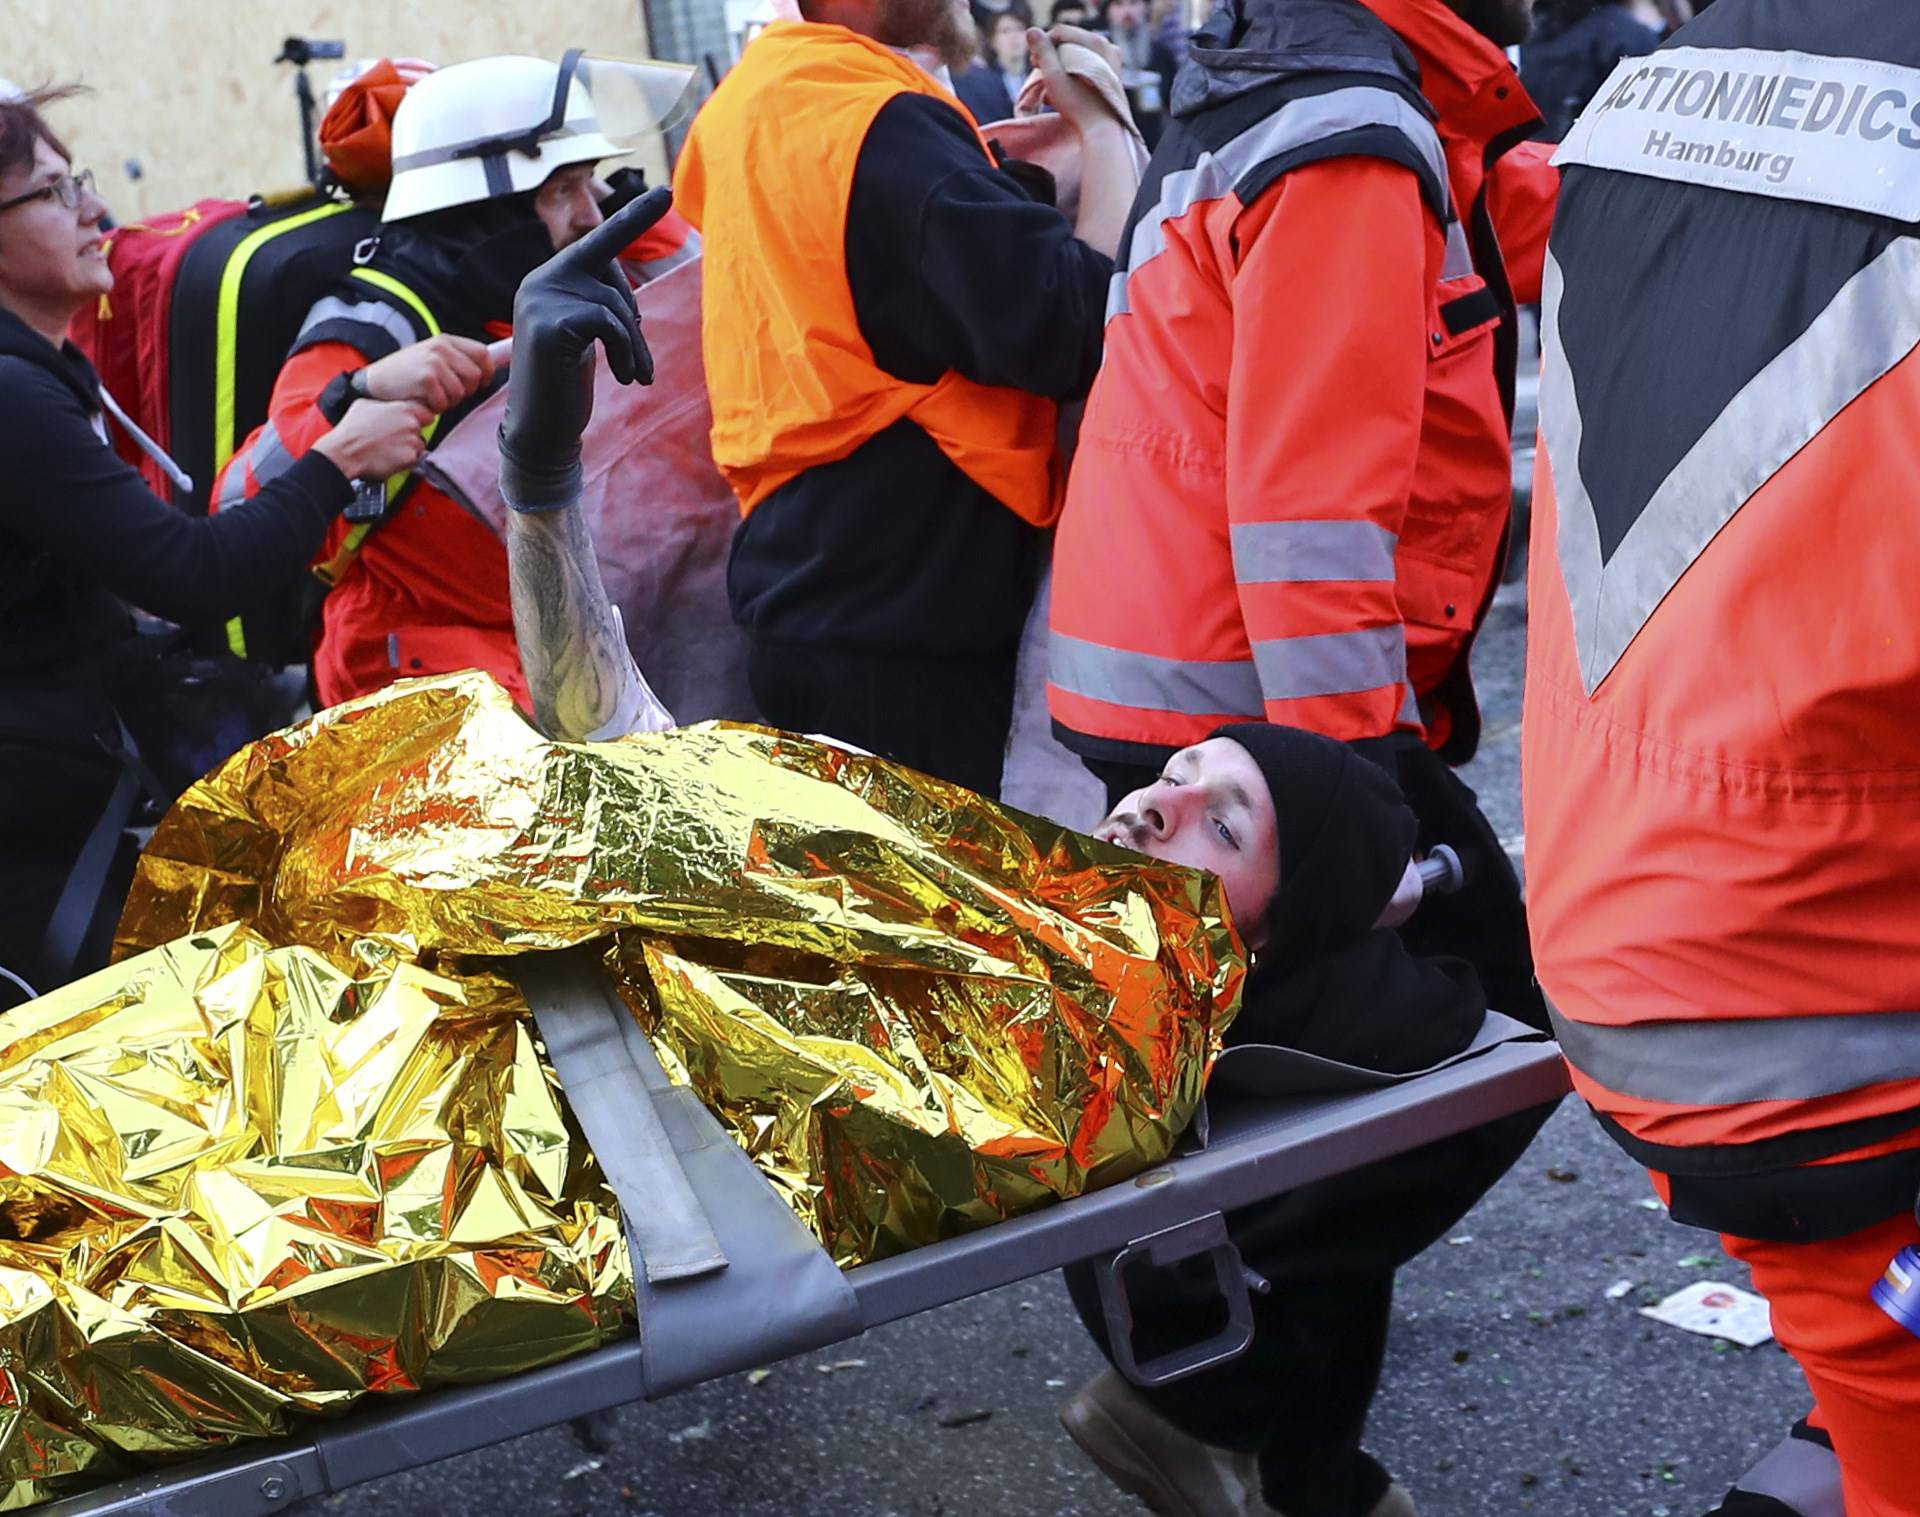 An injured protester is stretchered away during anti G-20 riots in Hamburg